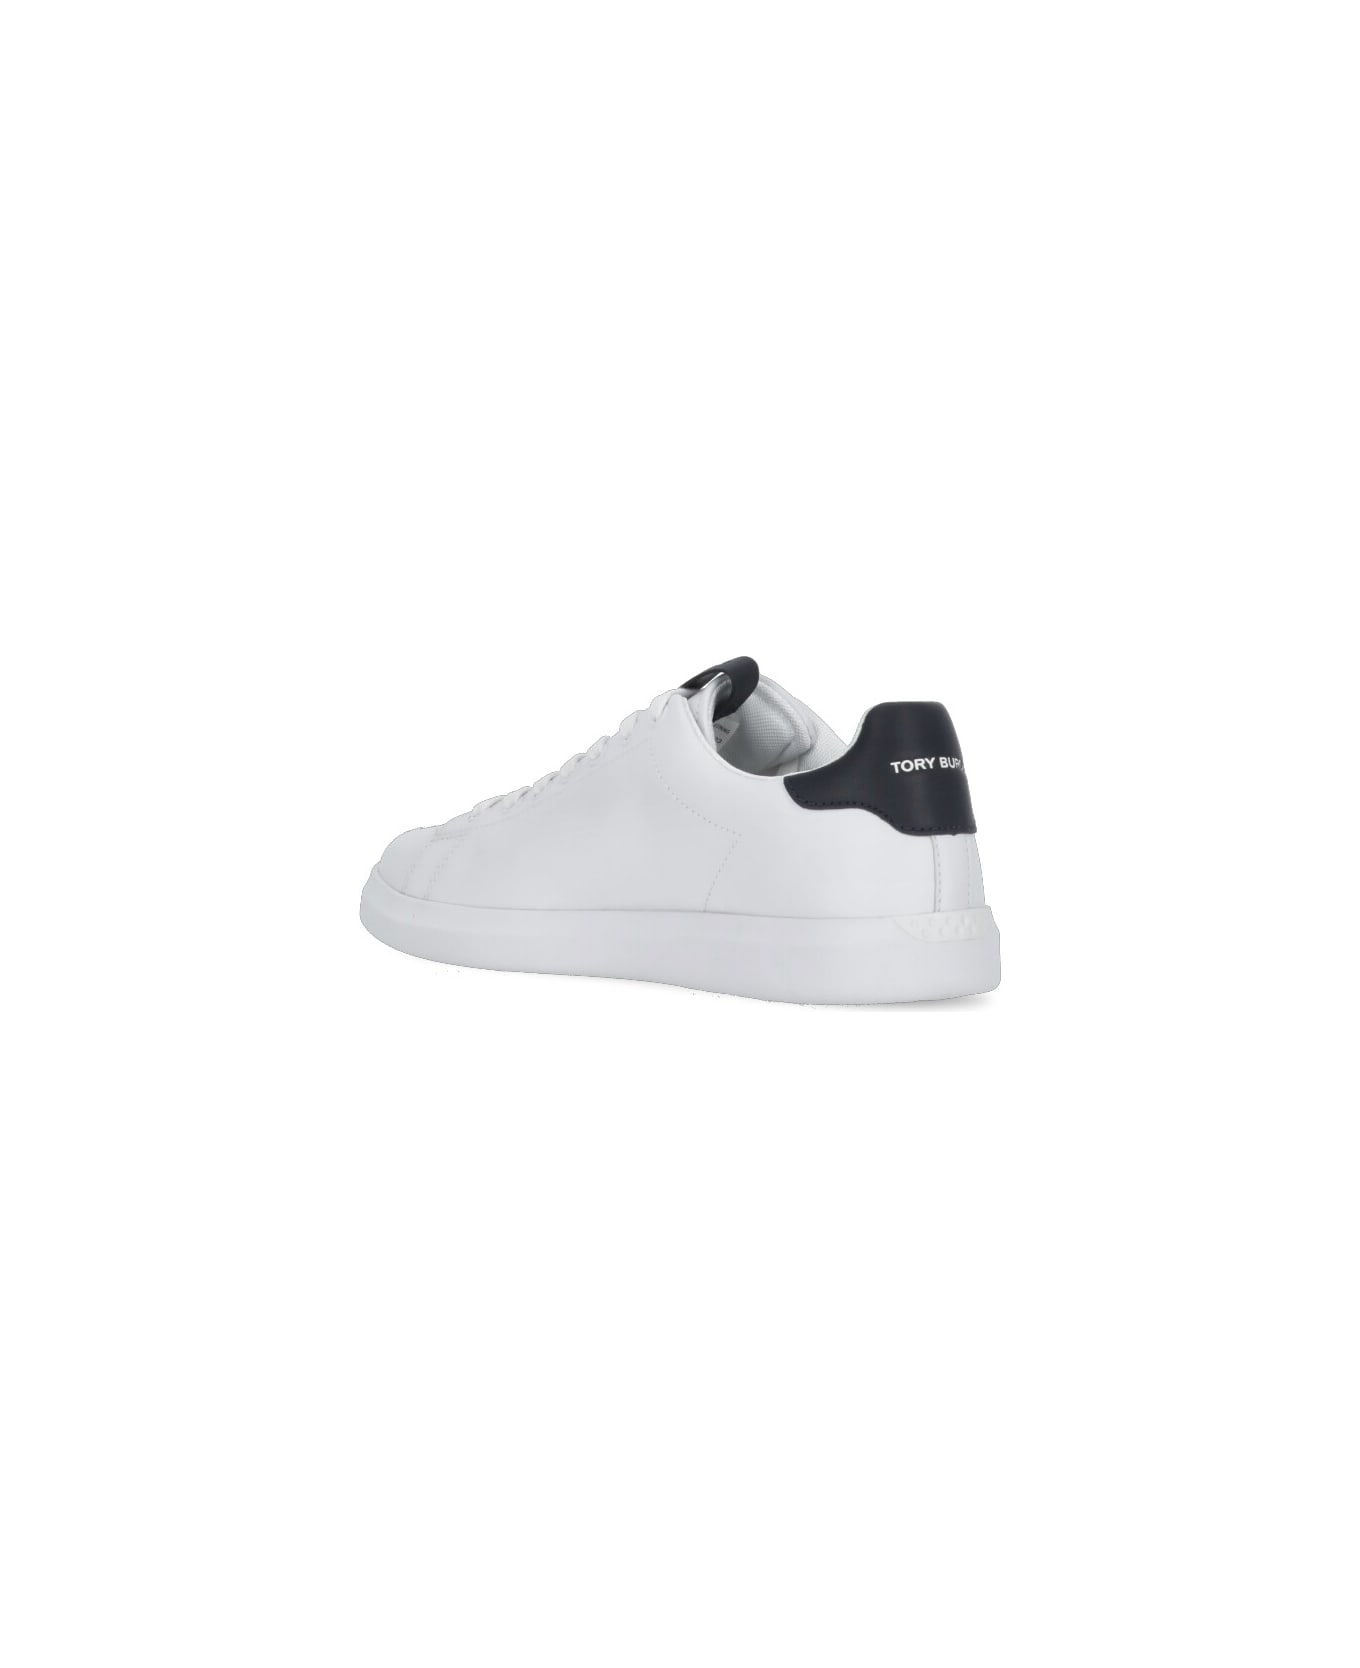 Tory Burch Howell Court Sneakers With Double T - White スニーカー